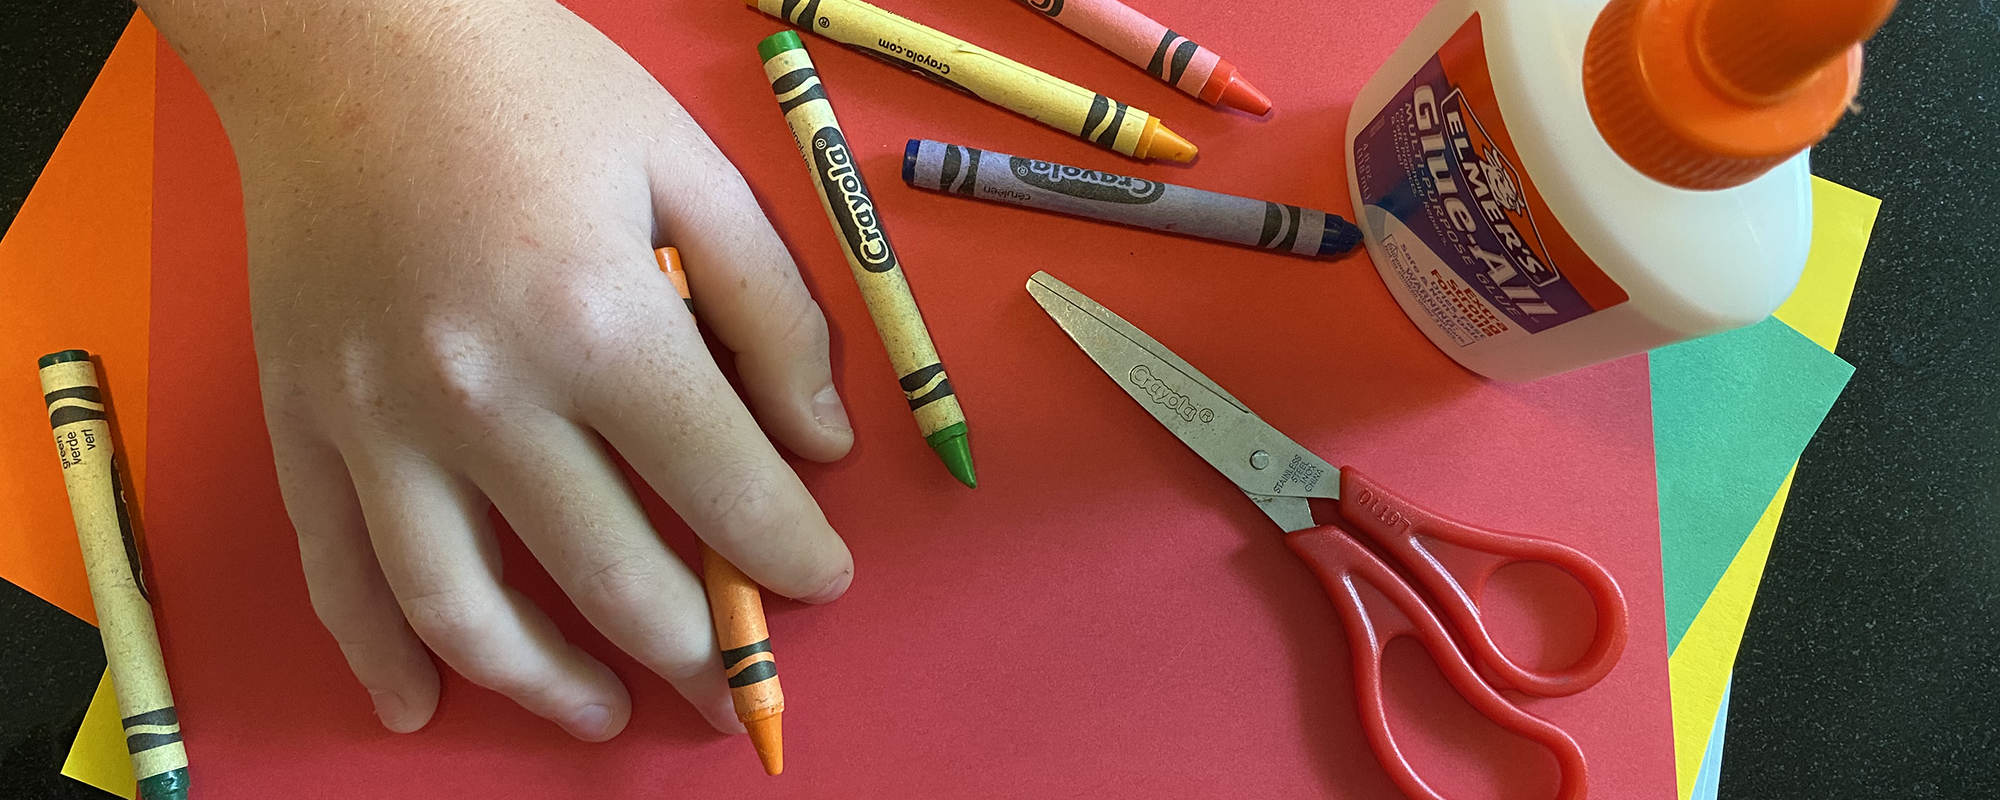 childs_hands_with_crayons